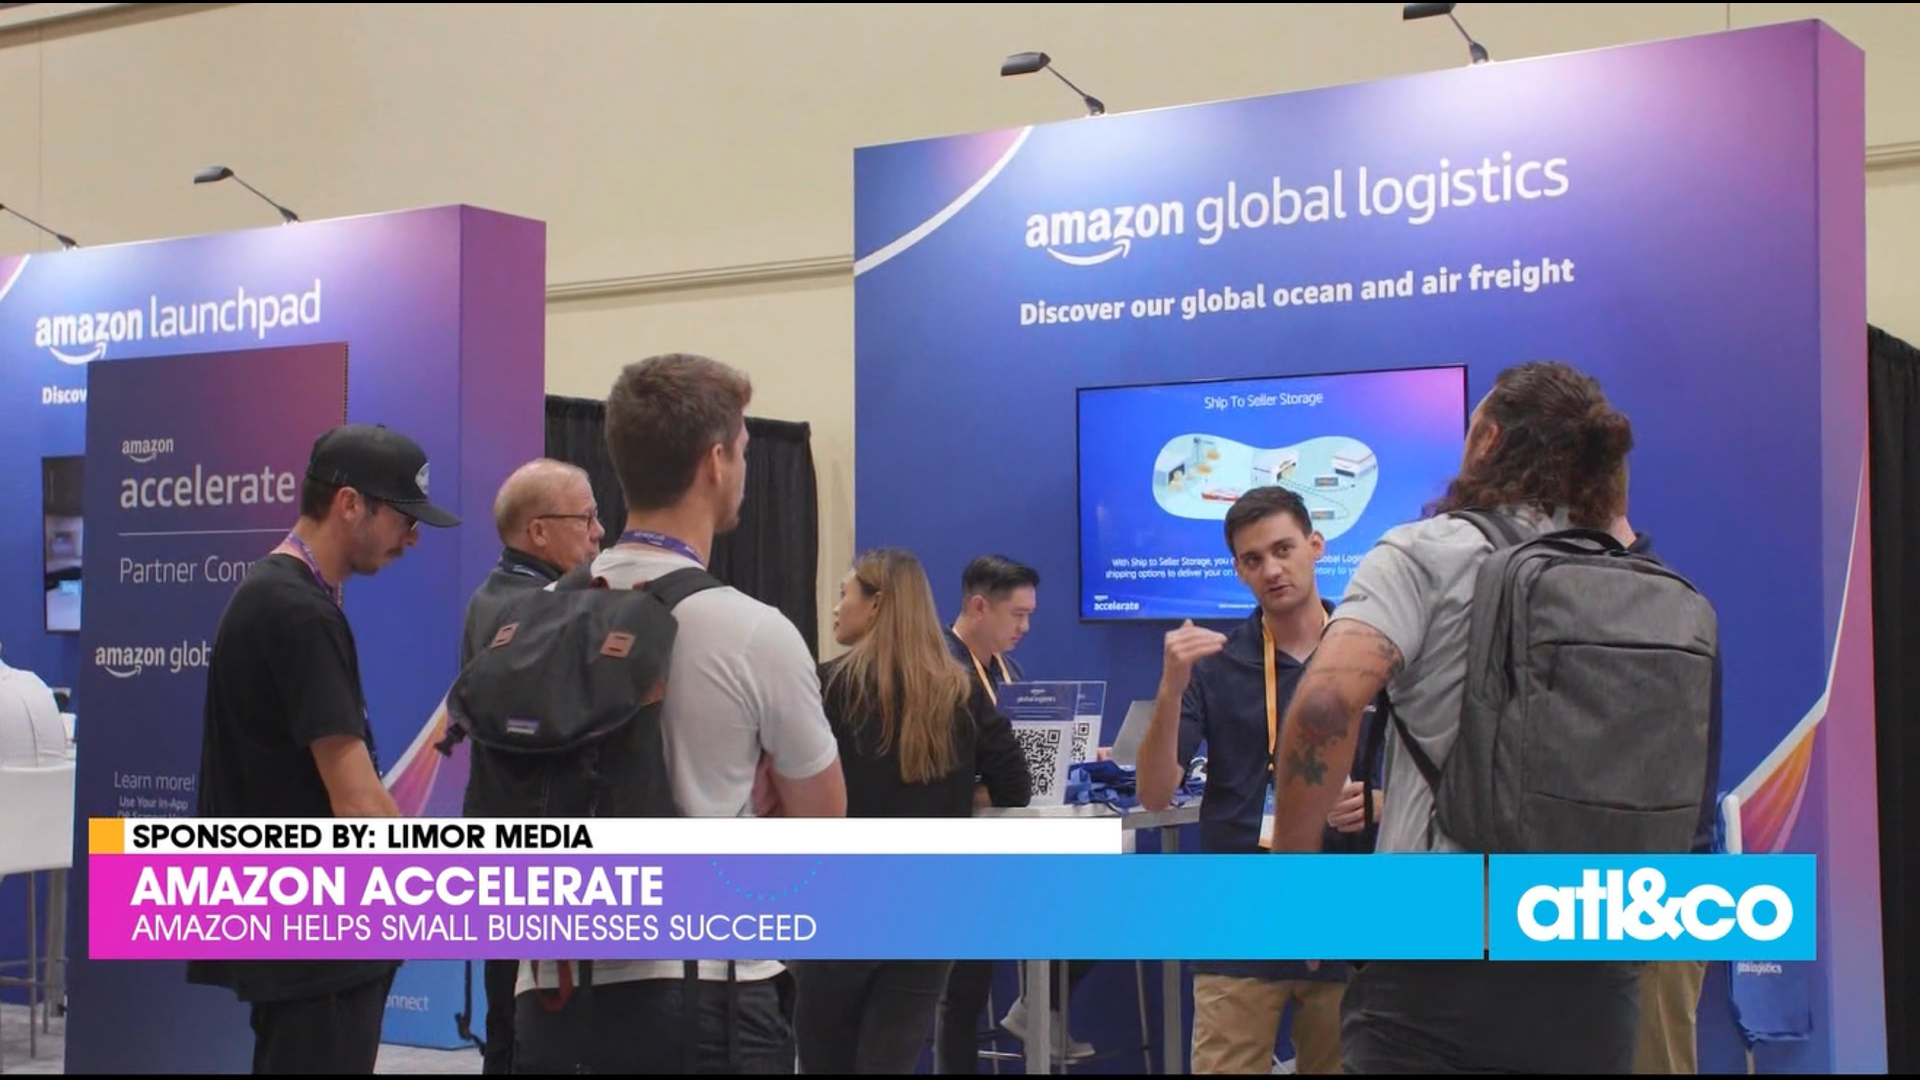 The Amazon Accelerate conference aims to enable long-term success of their partners by providing the most trusted shopping/selling experience. Visit sell.Amazon.com